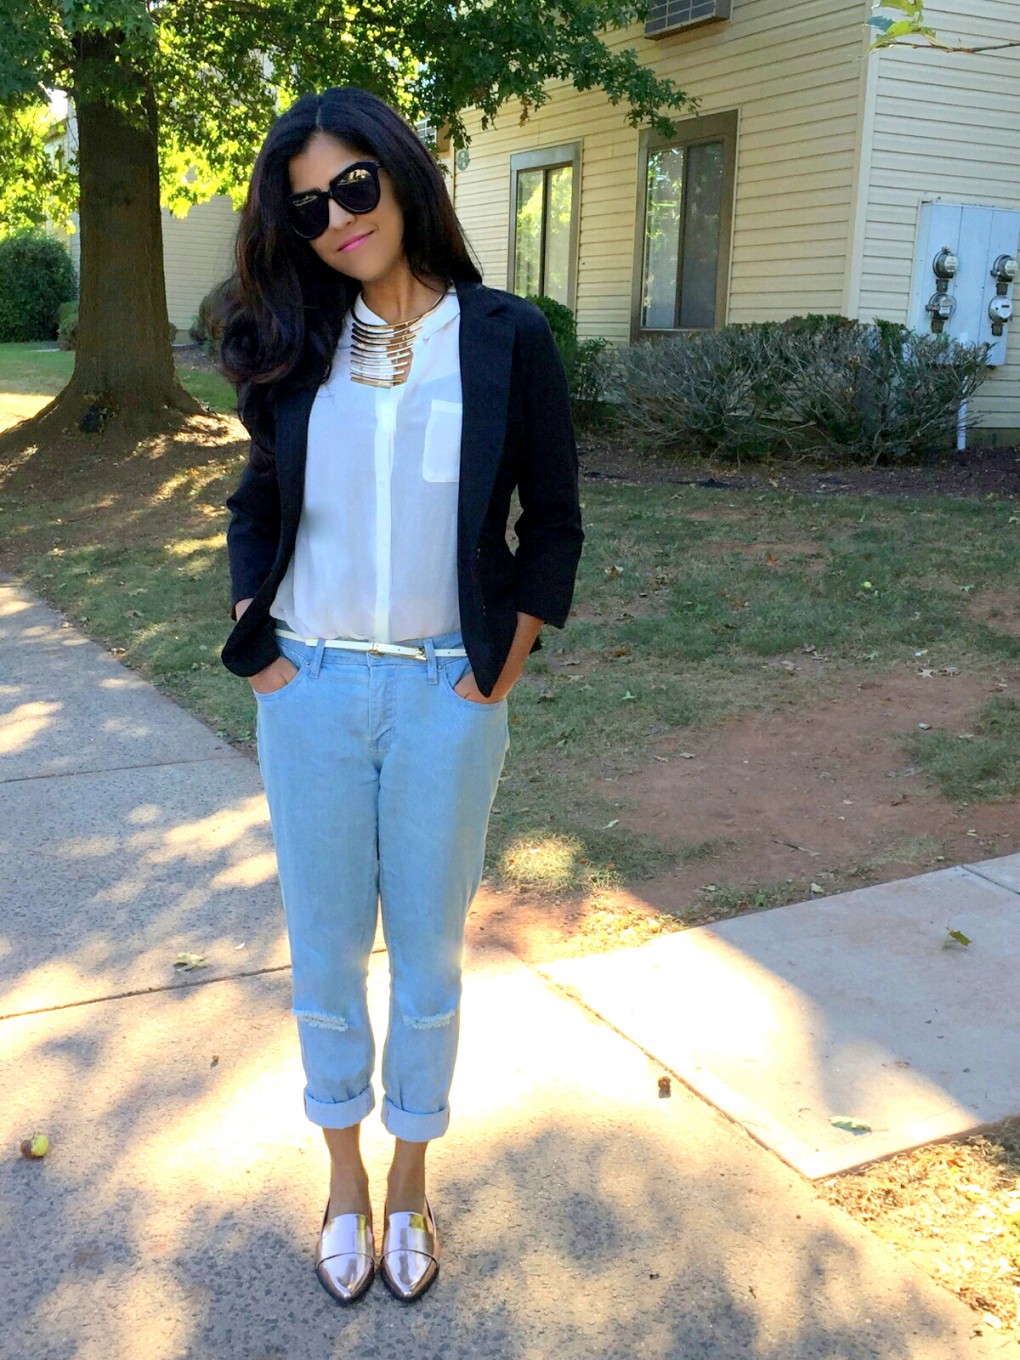 Fall Blazers - I: Black and White - The Chic Research